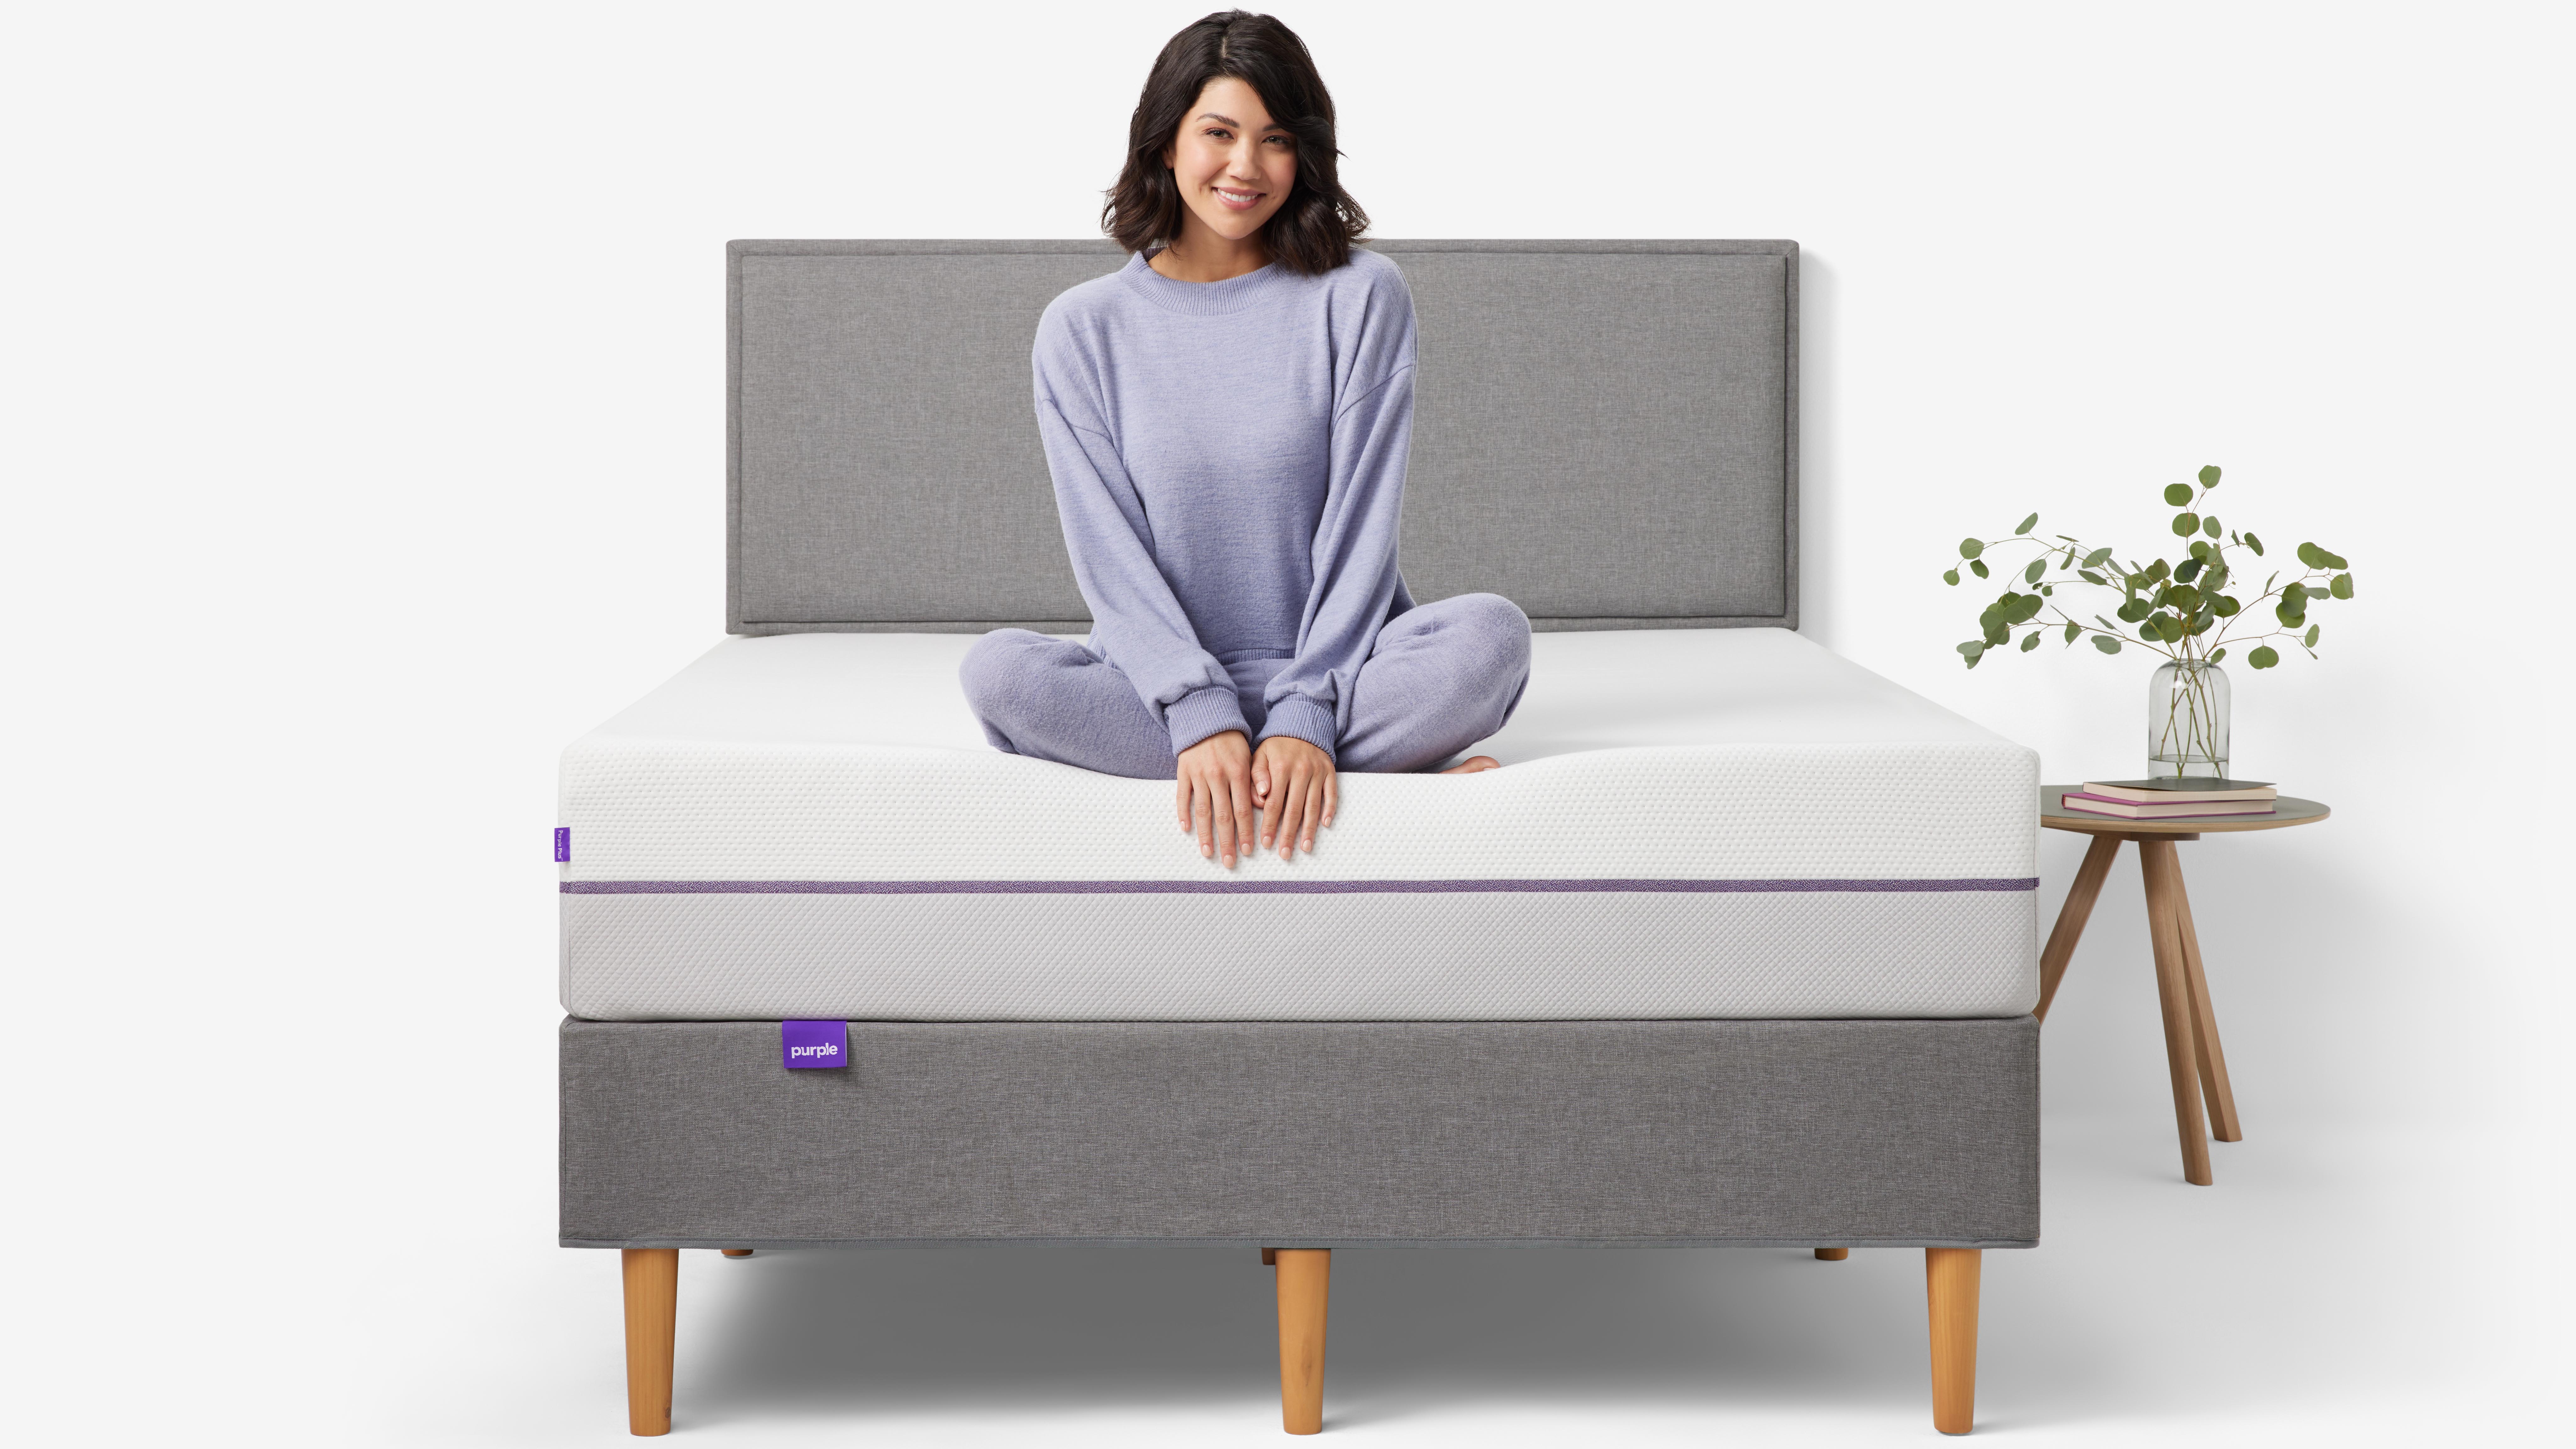 Best mattress: A woman with dark hair and dressed in lilac coloured pyjamas sits on the edge of the Purple Plus Mattress Purple Plus Mattress